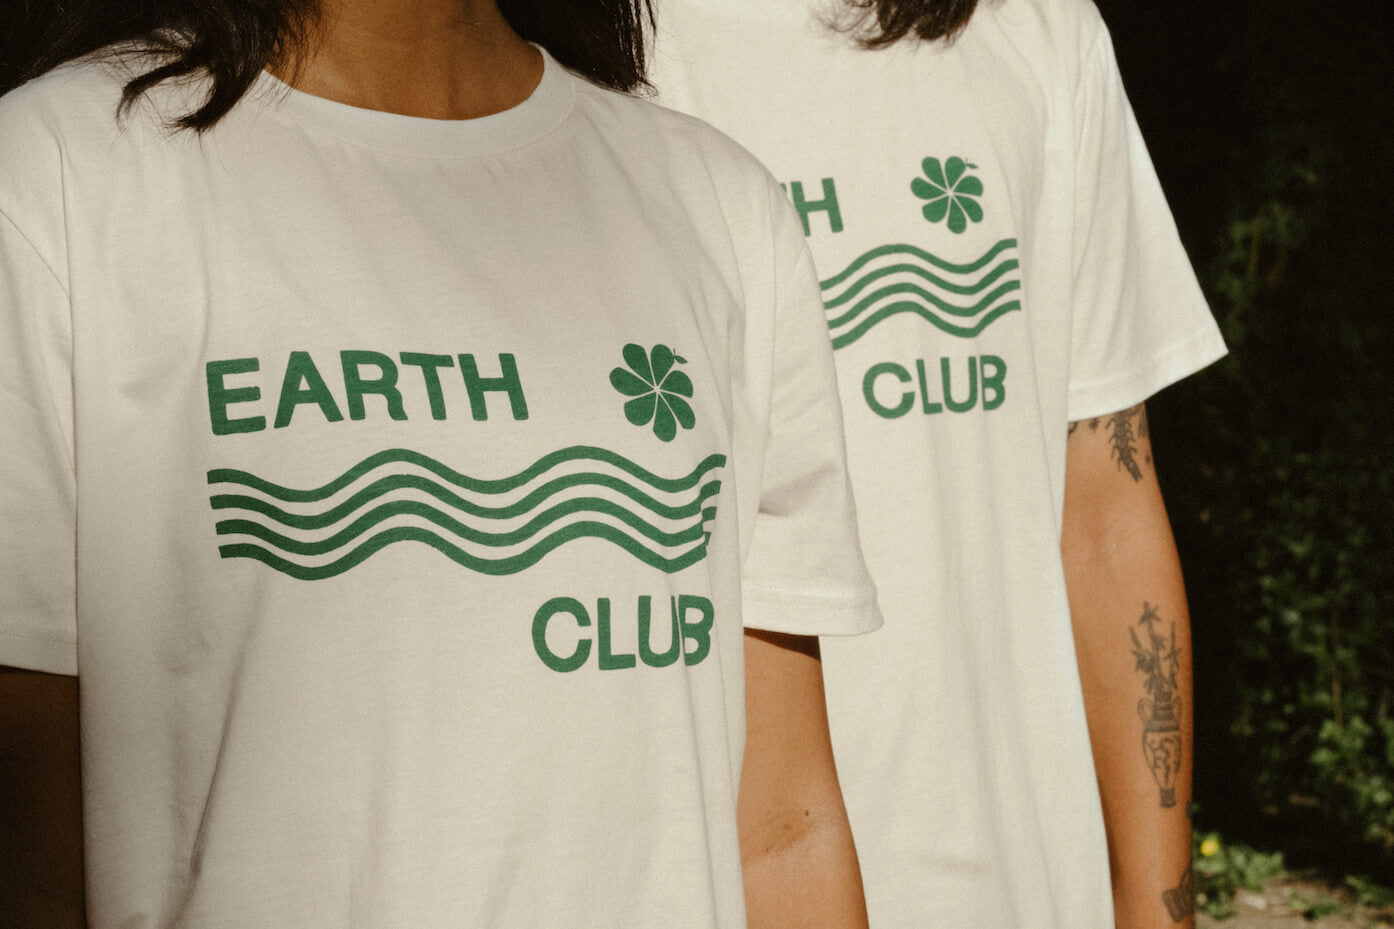 Join our Earth Club for a cleaner Bali